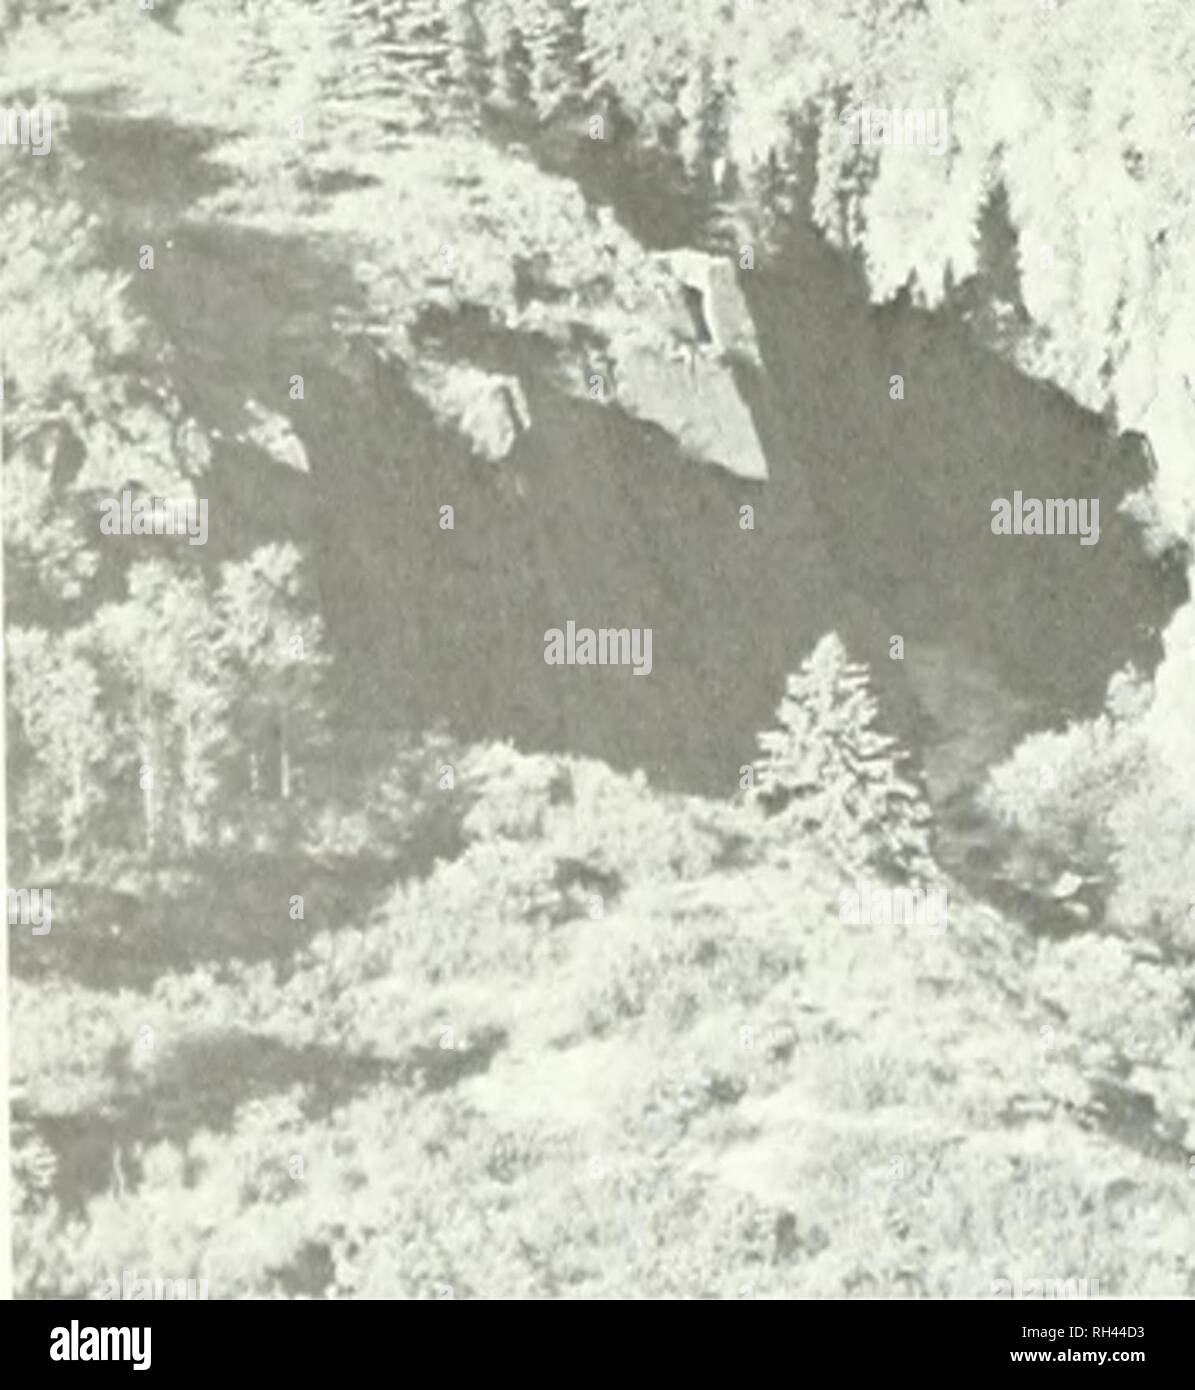 . Brigham Young University science bulletin. Biology -- Periodicals.   J %^ â â &gt; t I &quot;10 7. Southwest along Buckinghorsc Creek near its junction with the Spatsizi River. Outcrops of Jurassic canics are in the foreground with spruce woods on the talus of the overlying Bowser formation at approxim .57Â°27' N; 128Â°35' W. Picea glauca woodland, with Populus tremuloides, lietulti glamlulosa. an ' species in the openings. vol- atelv SÂ«/iA:. Please note that these images are extracted from scanned page images that may have been digitally enhanced for readability - coloration and appeara Stock Photo